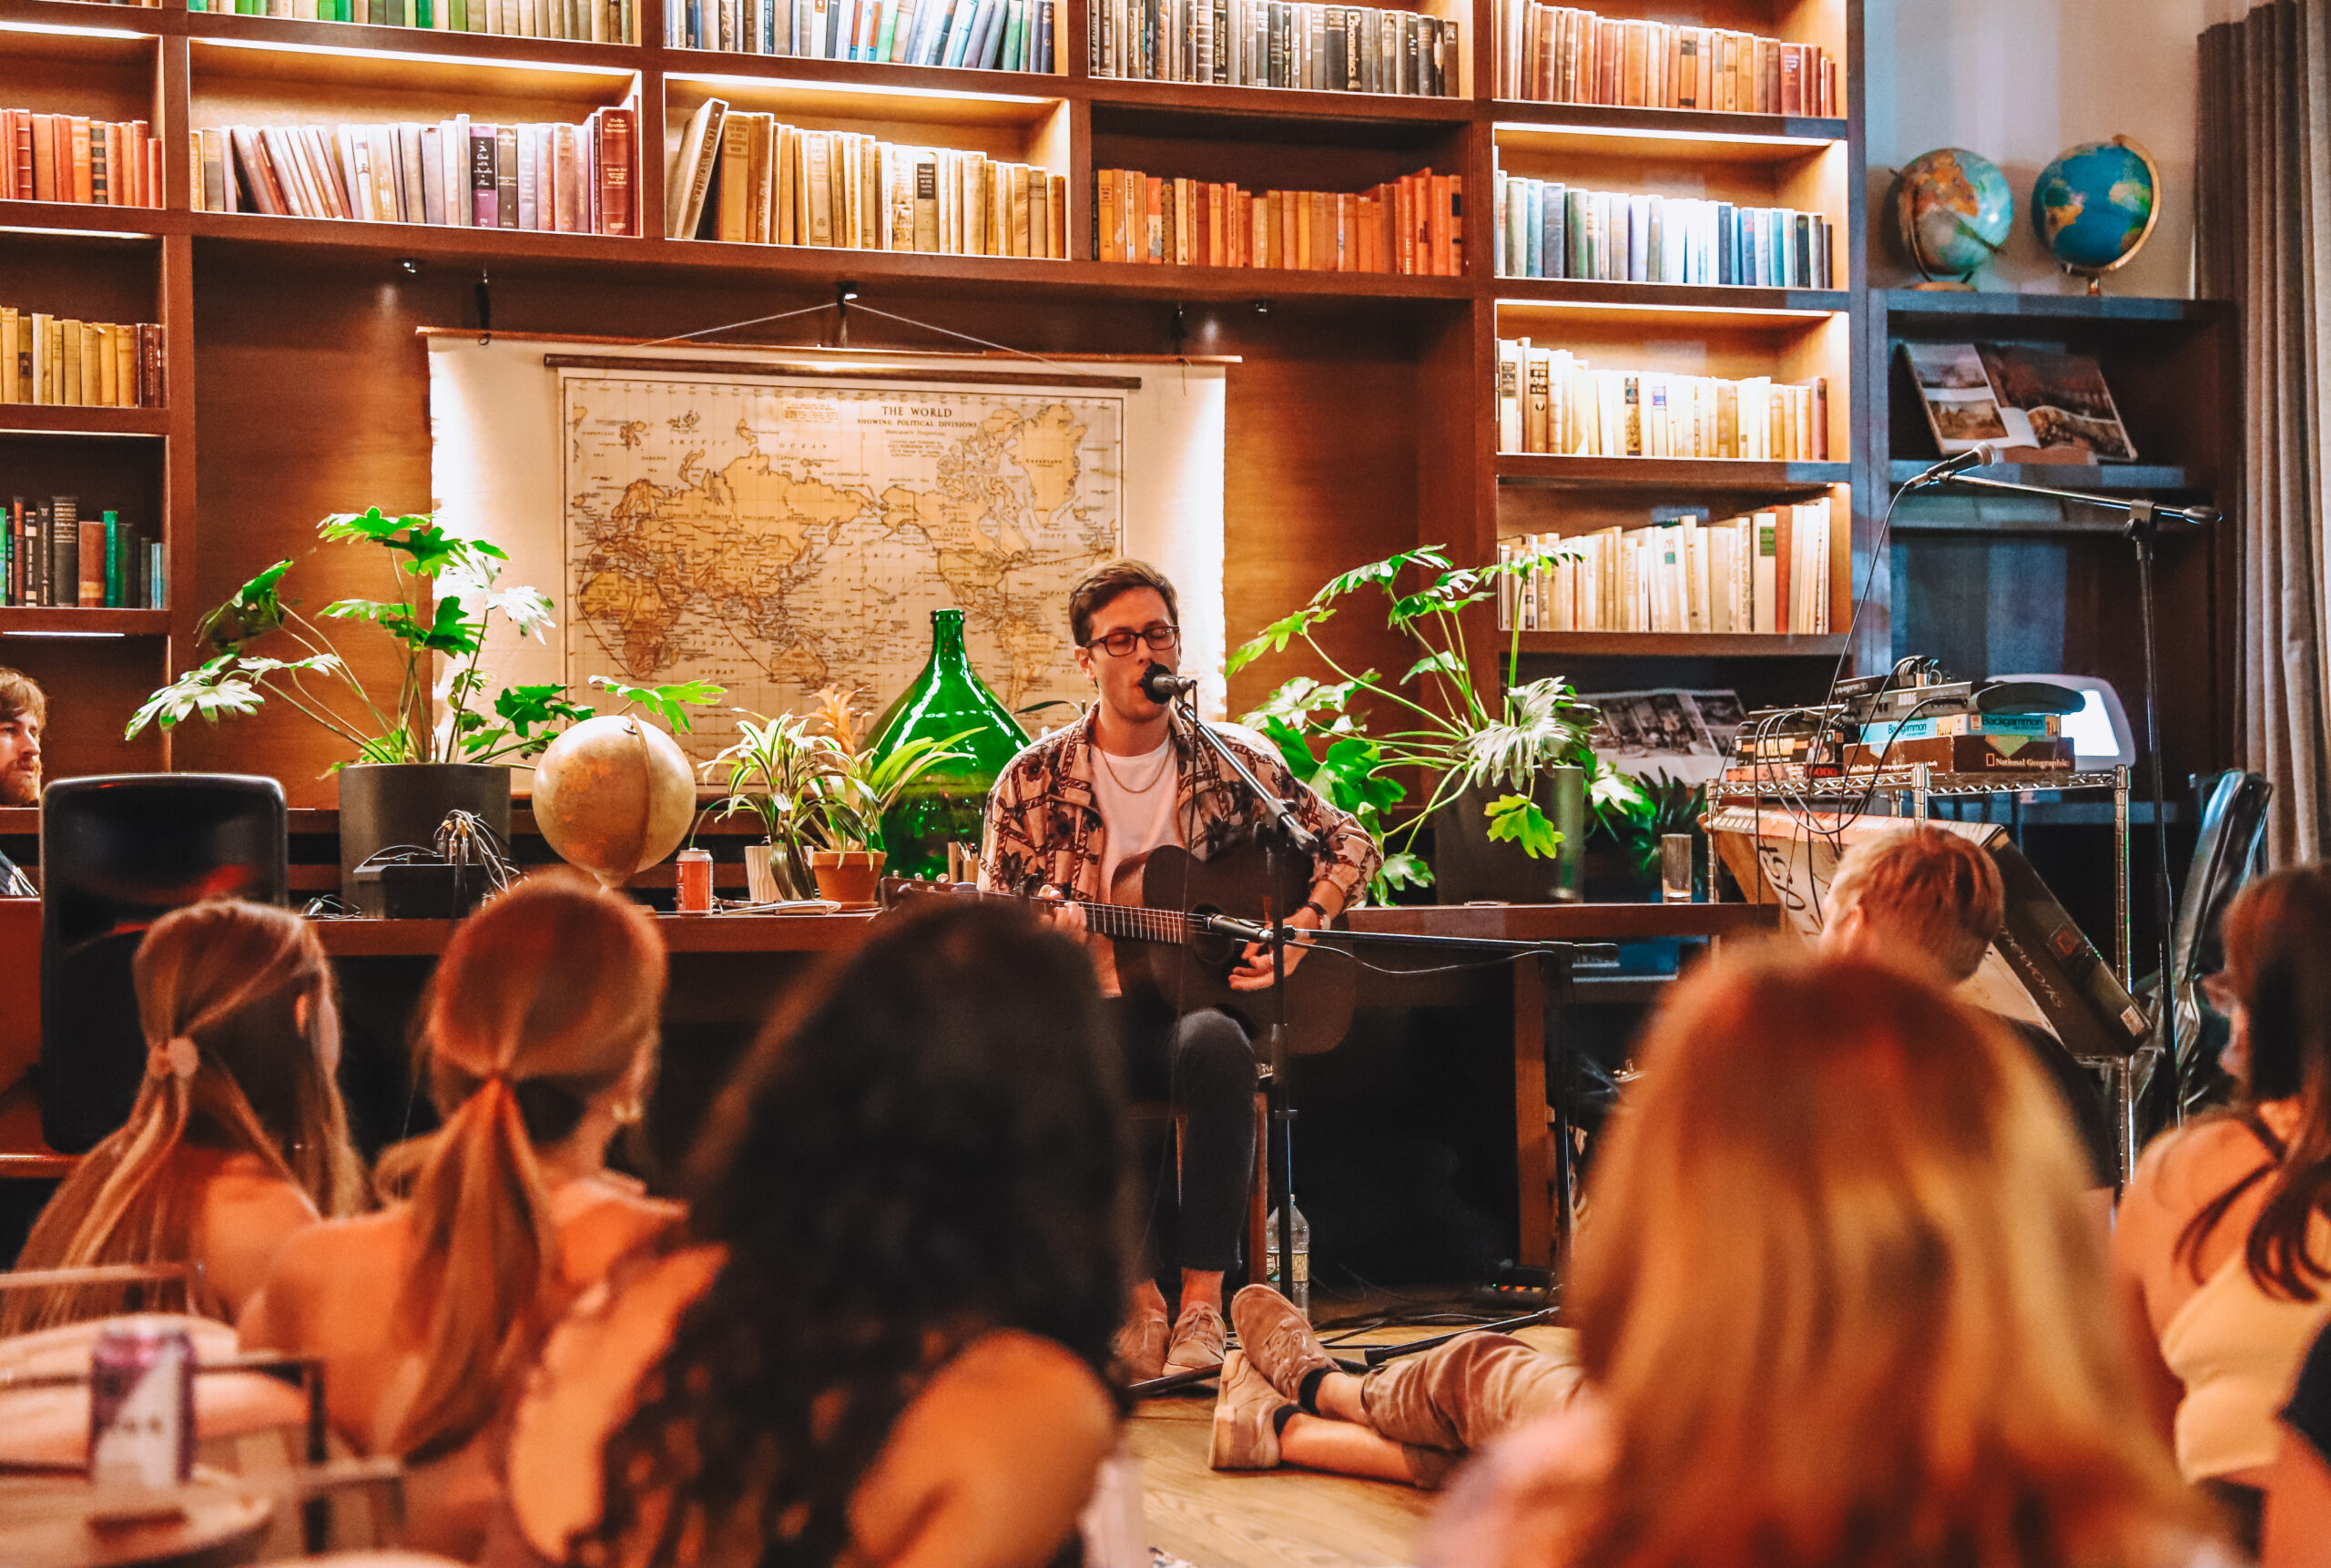 Visit the Sofar Sounds at Midtown event page